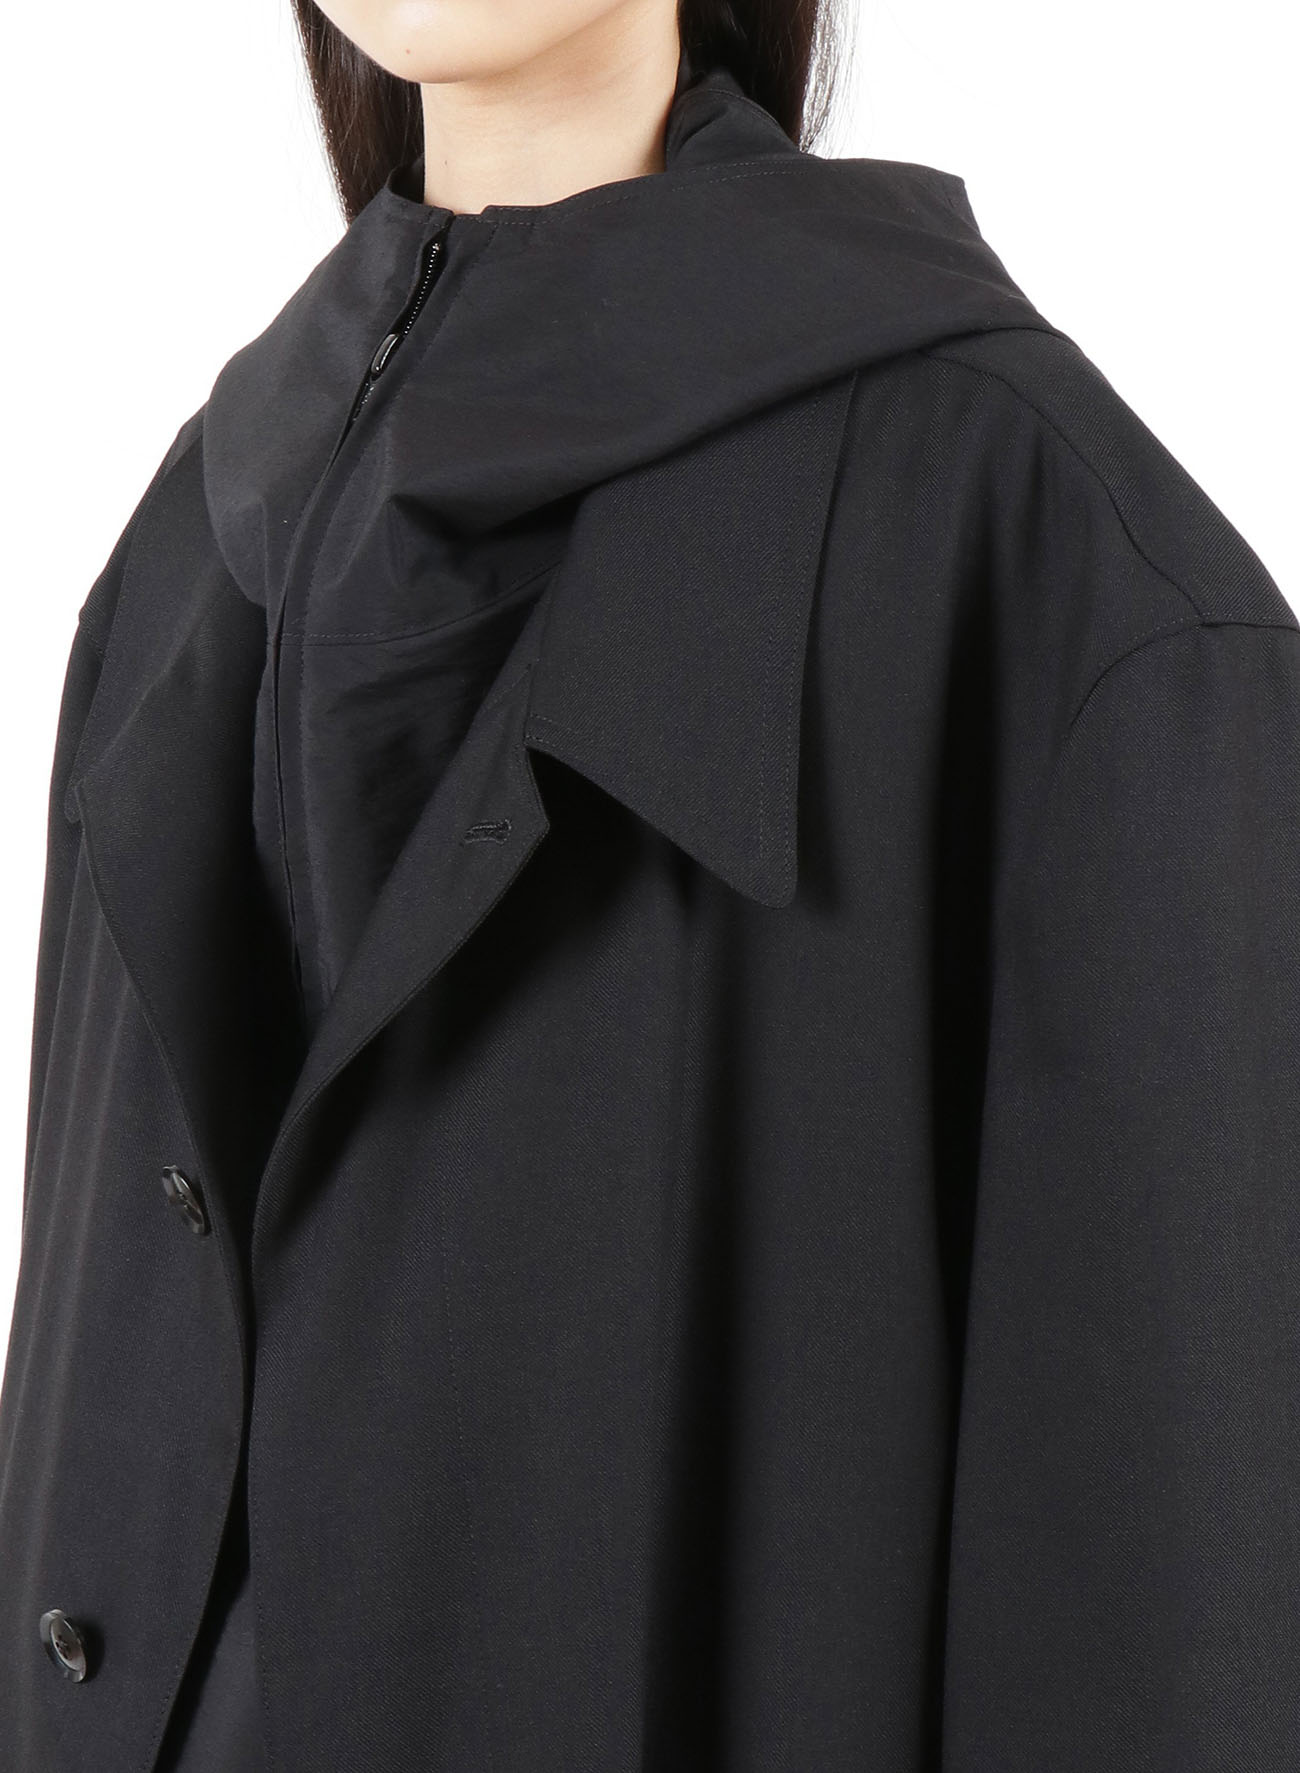 VISCOSE DOUBLE COVER WOOL SERGE DOUBLE LAYER COAT